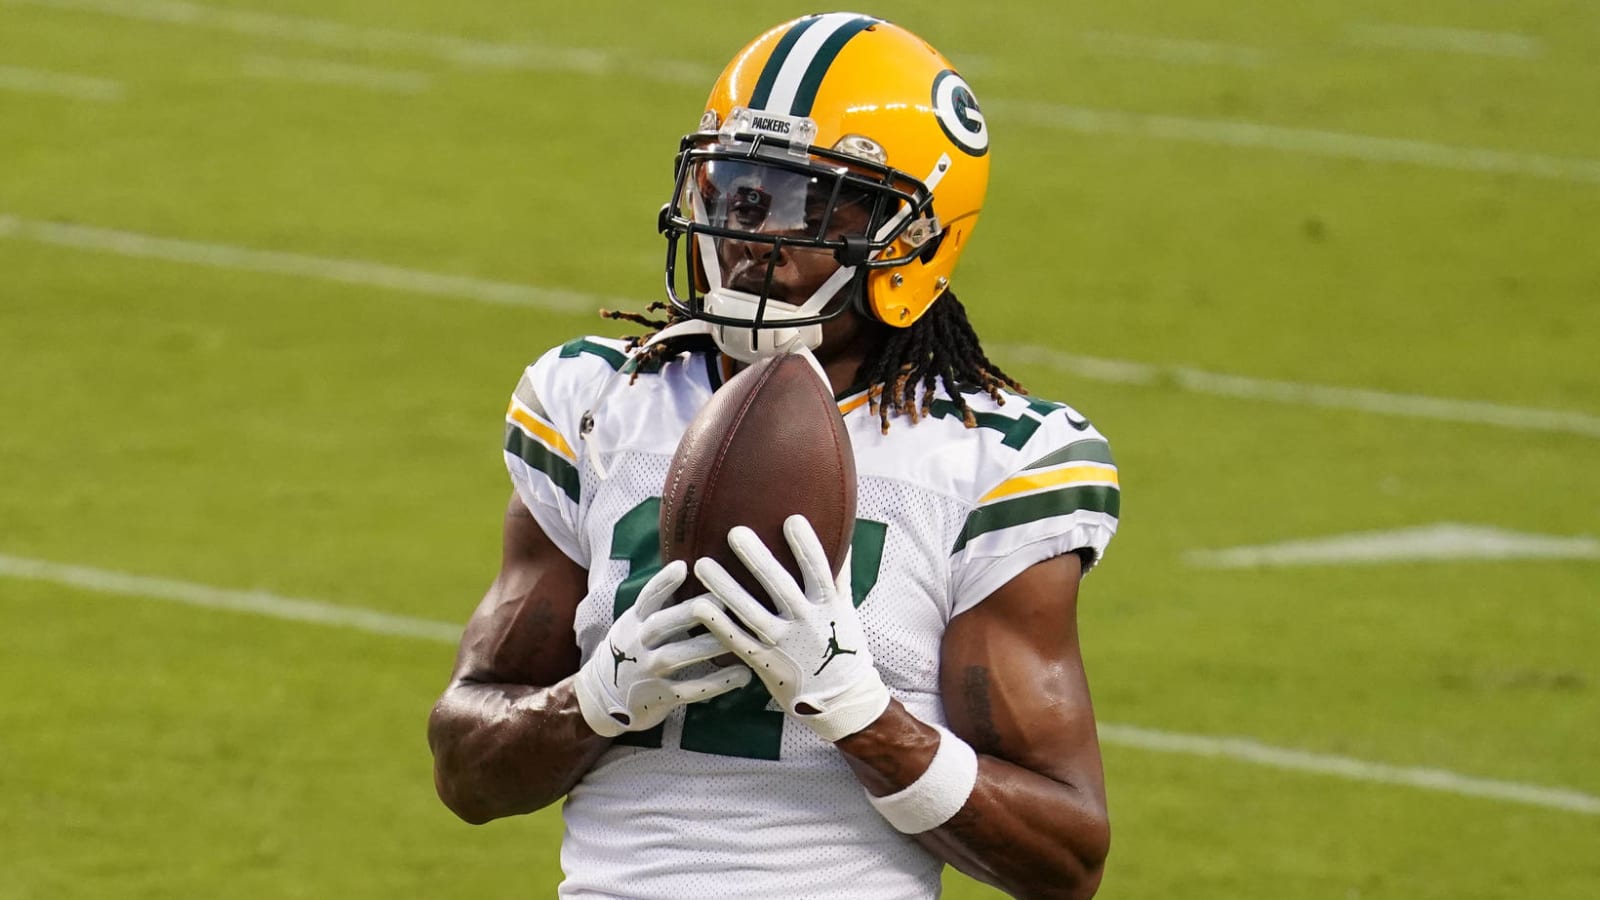 Packers' Adams: 'I’m the best wide receiver in the game'